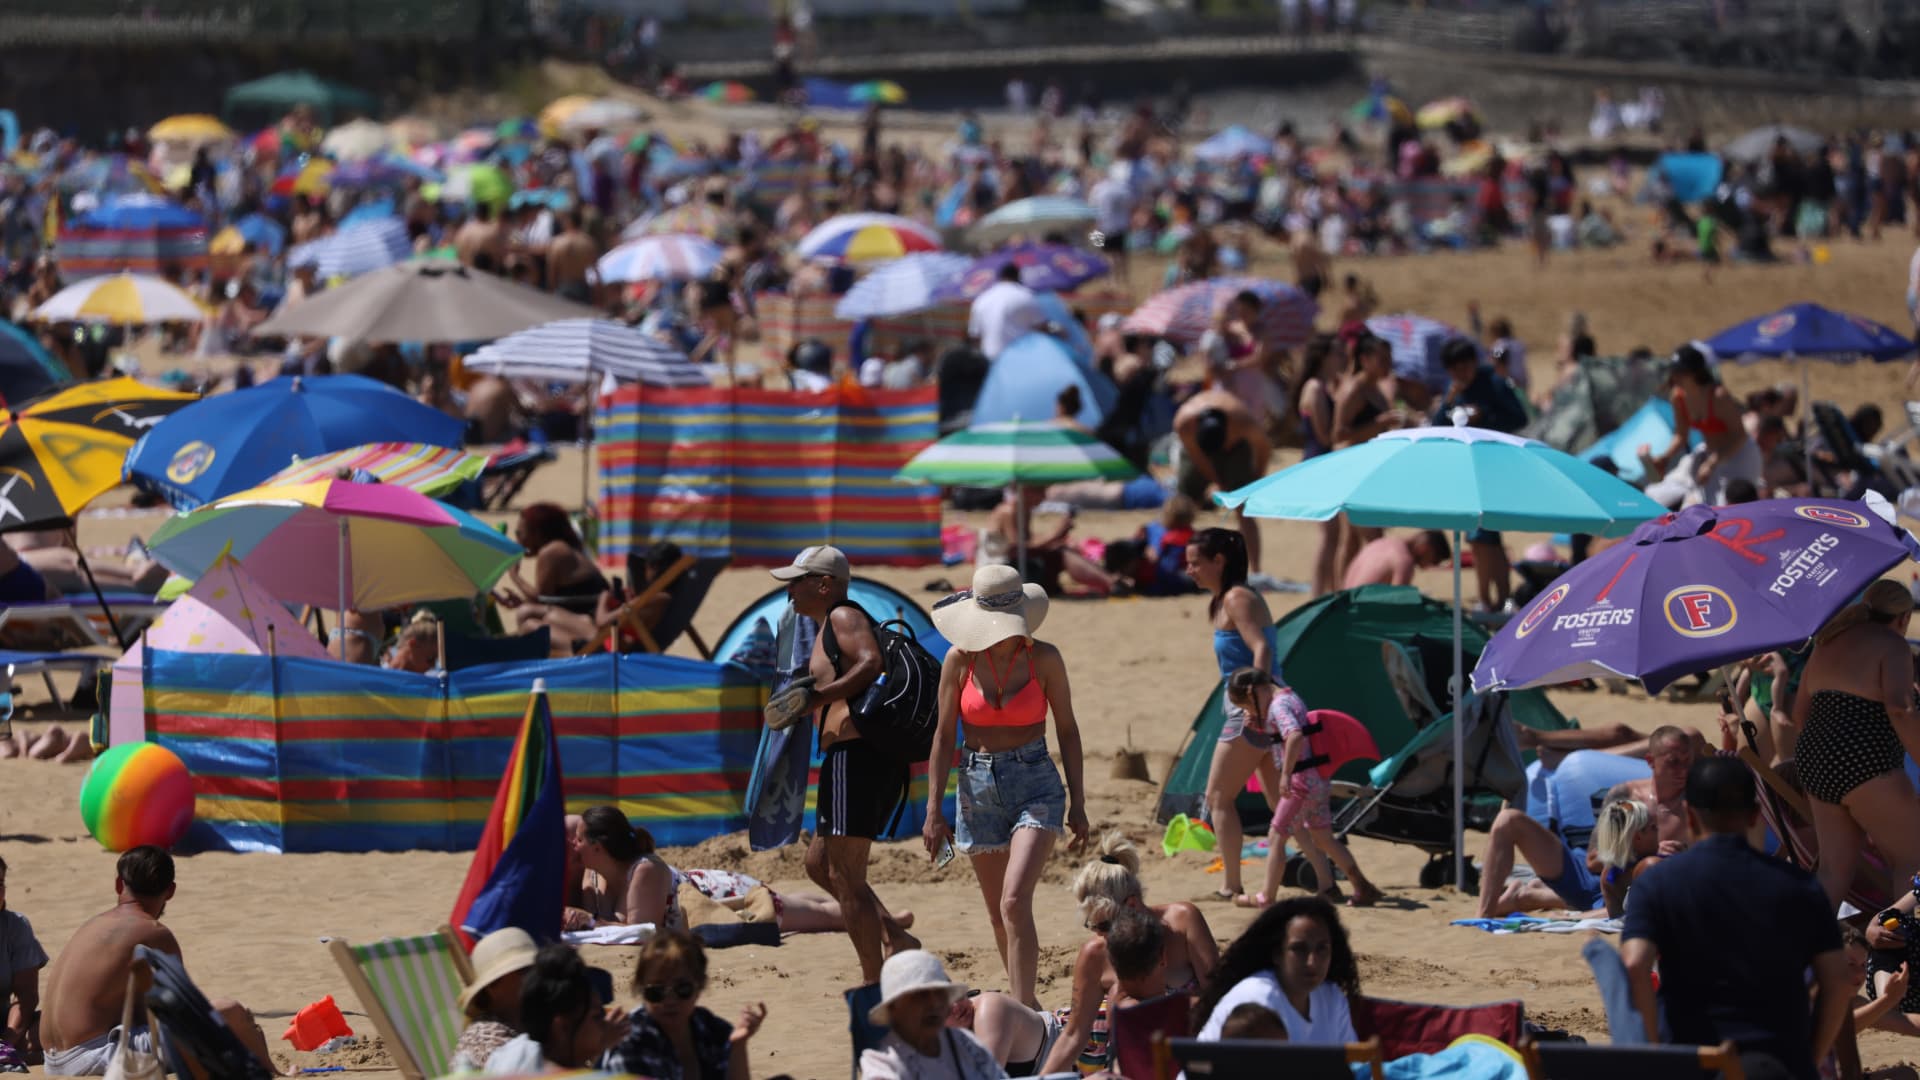 UK braces for hottest day on record with highs of 106 degrees expected